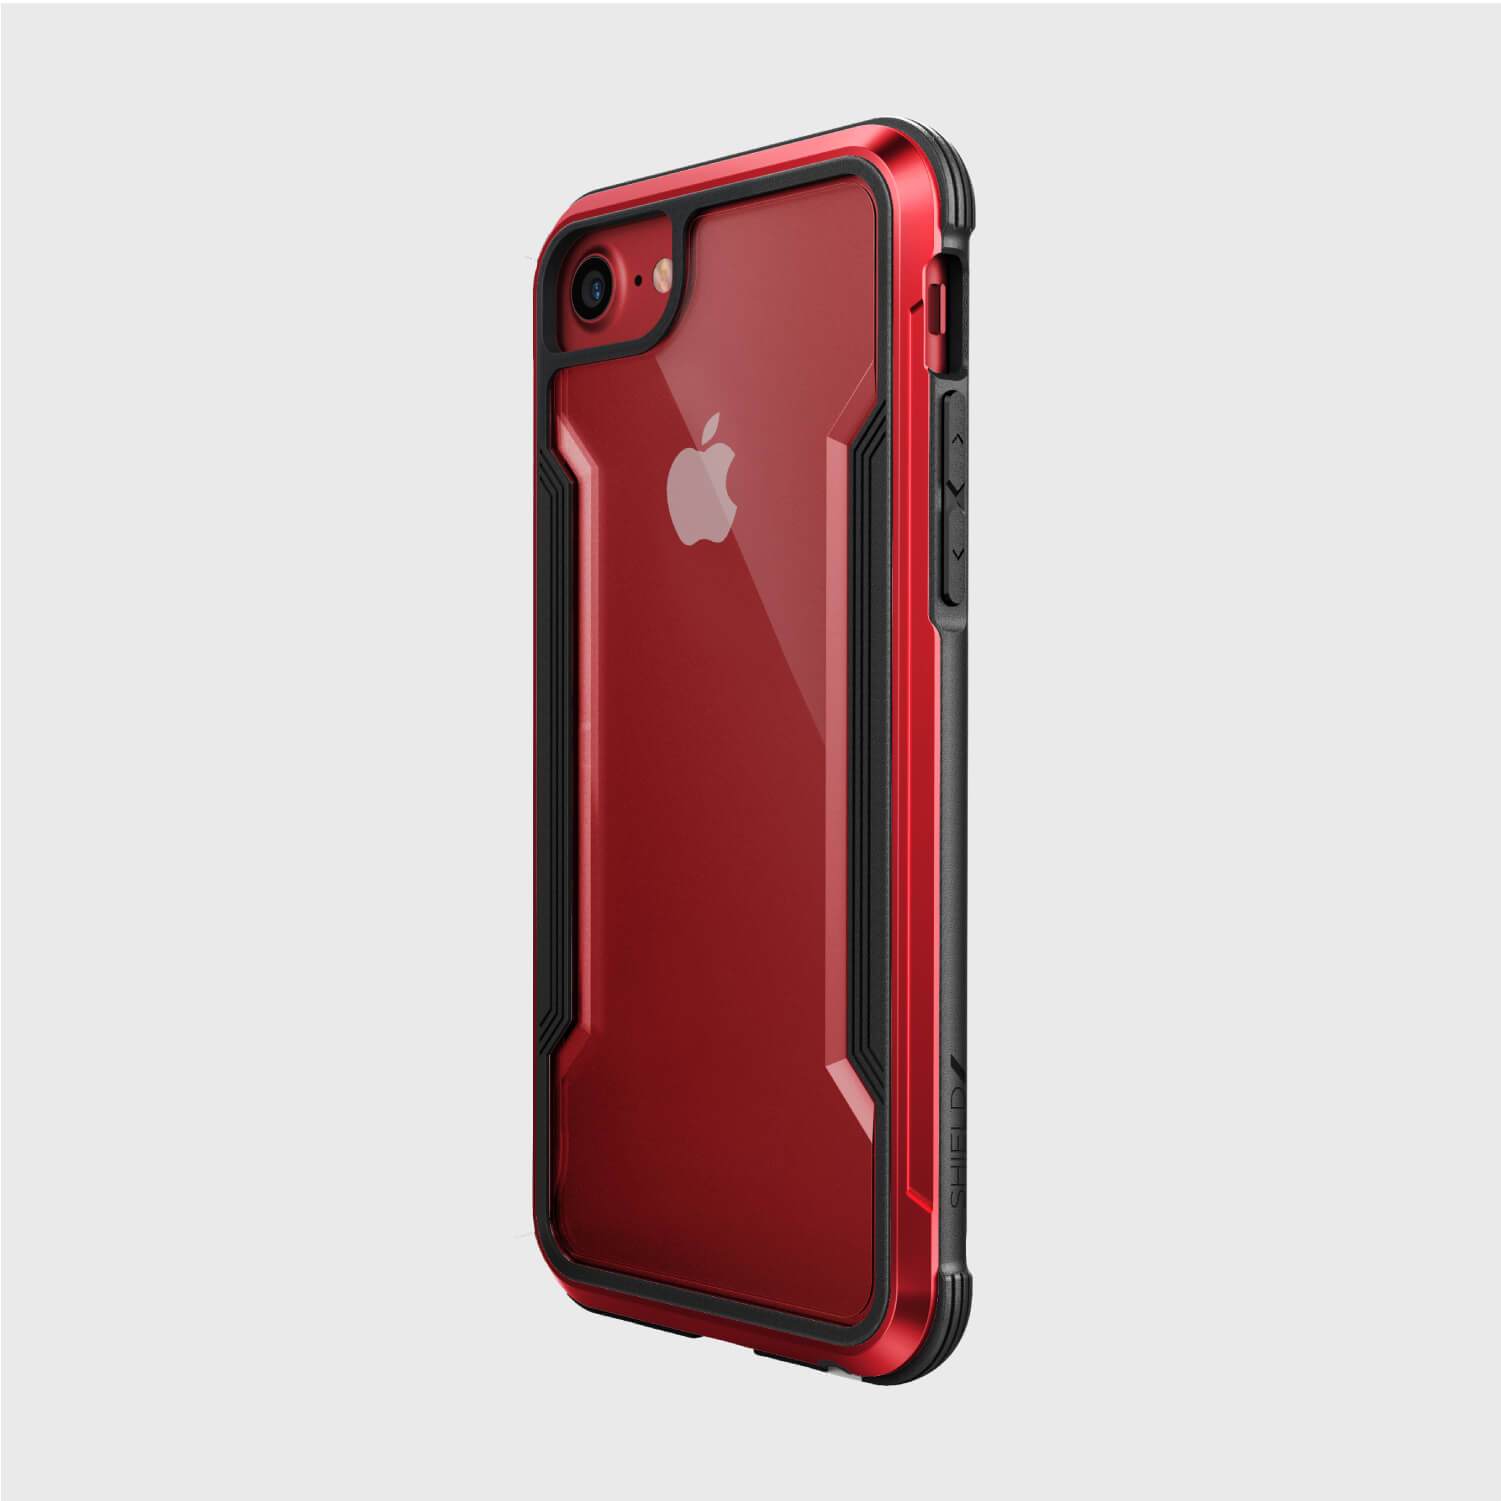 The back of a Raptic iPhone SE/8/7 Case - SHIELD in red and black.